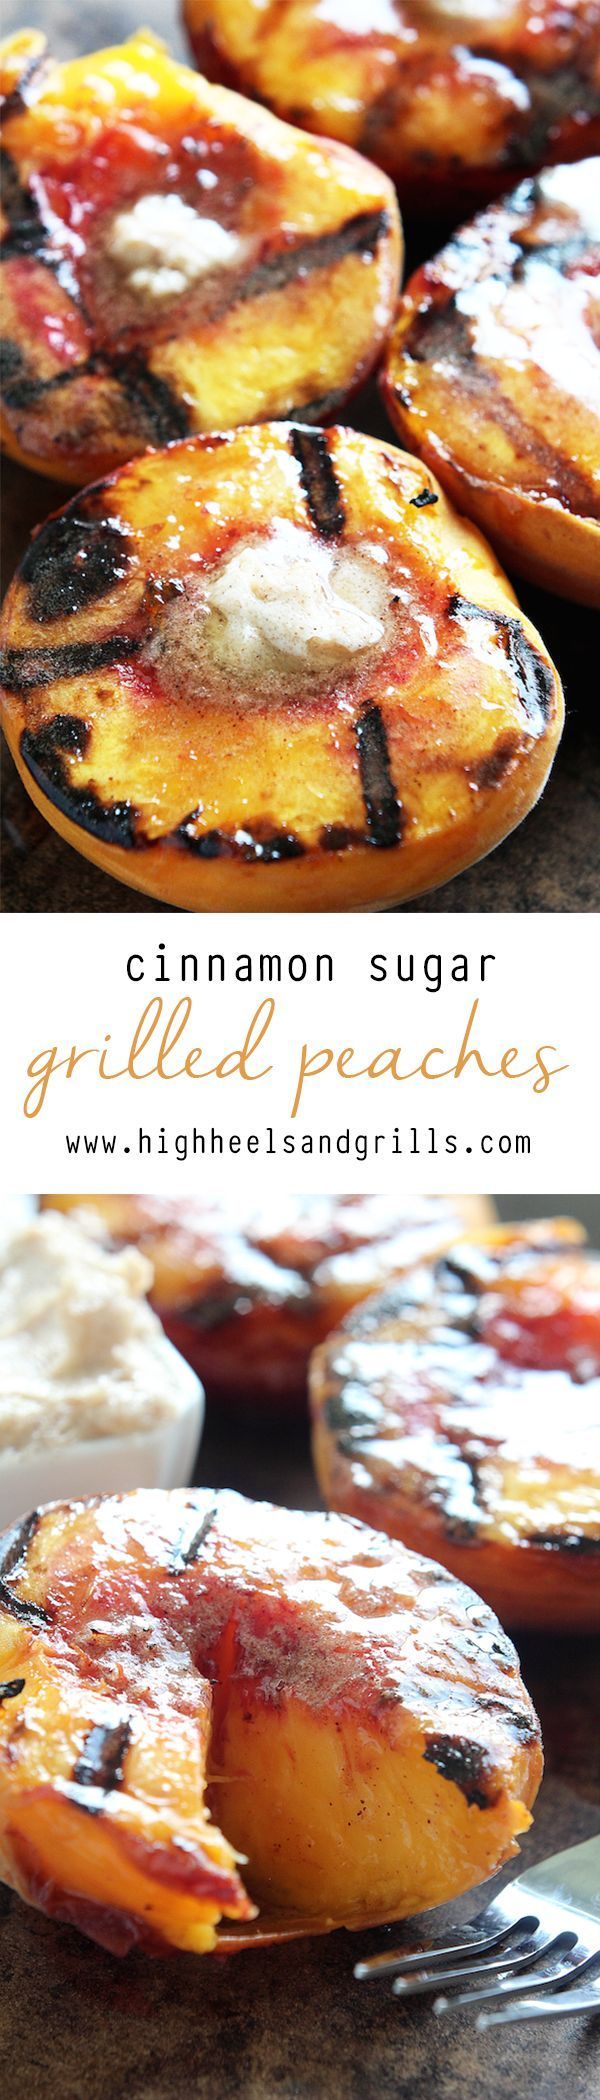 Cinnamon Sugar Grilled Peaches are a yummy dessert that can be made quick! They are topped with a cinnamon sugar butter and taste